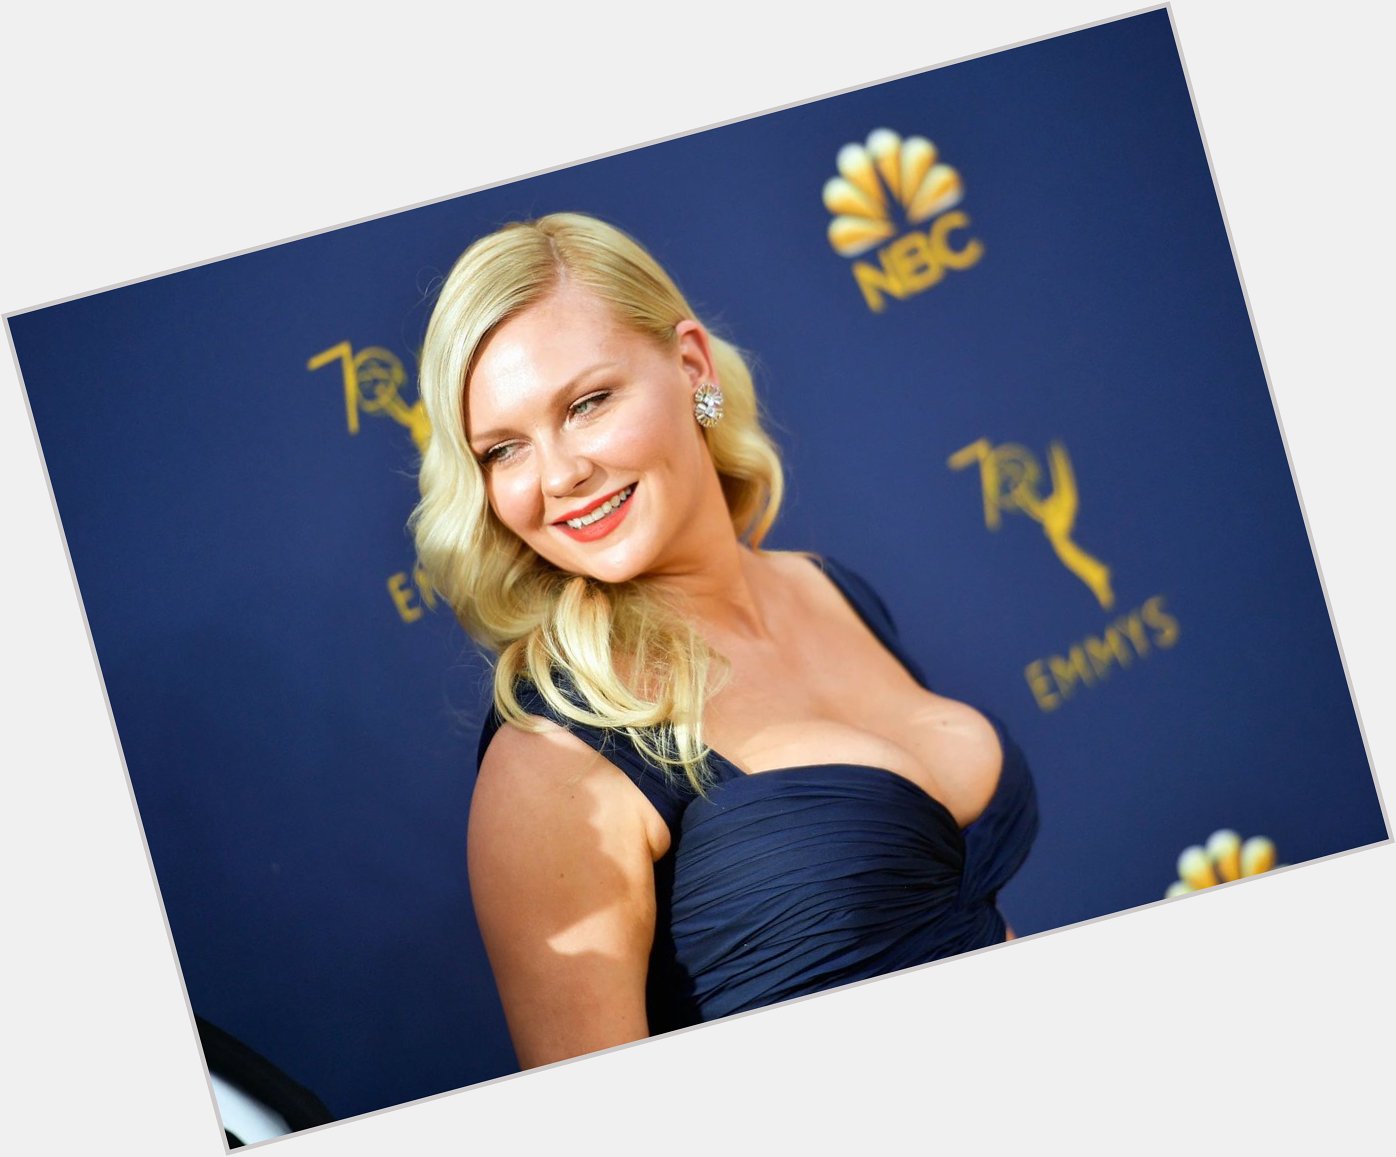  I d like to wish Academy Award nominated actress Kirsten Dunst a Happy Birthday! 